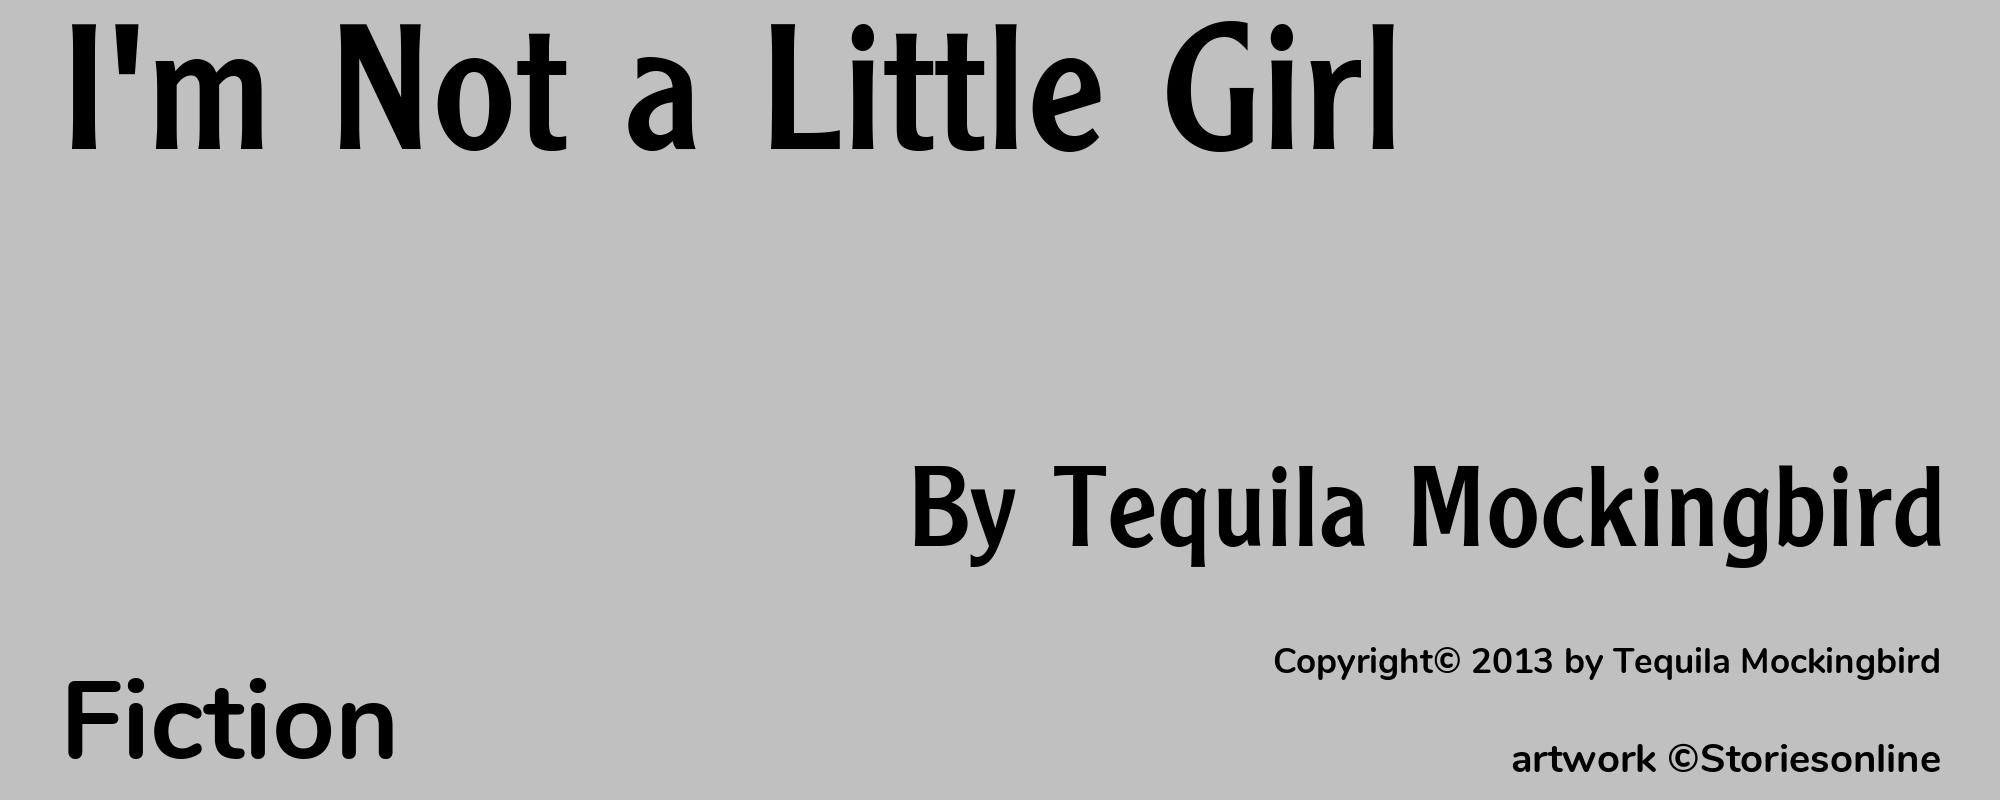 I'm Not a Little Girl - Cover